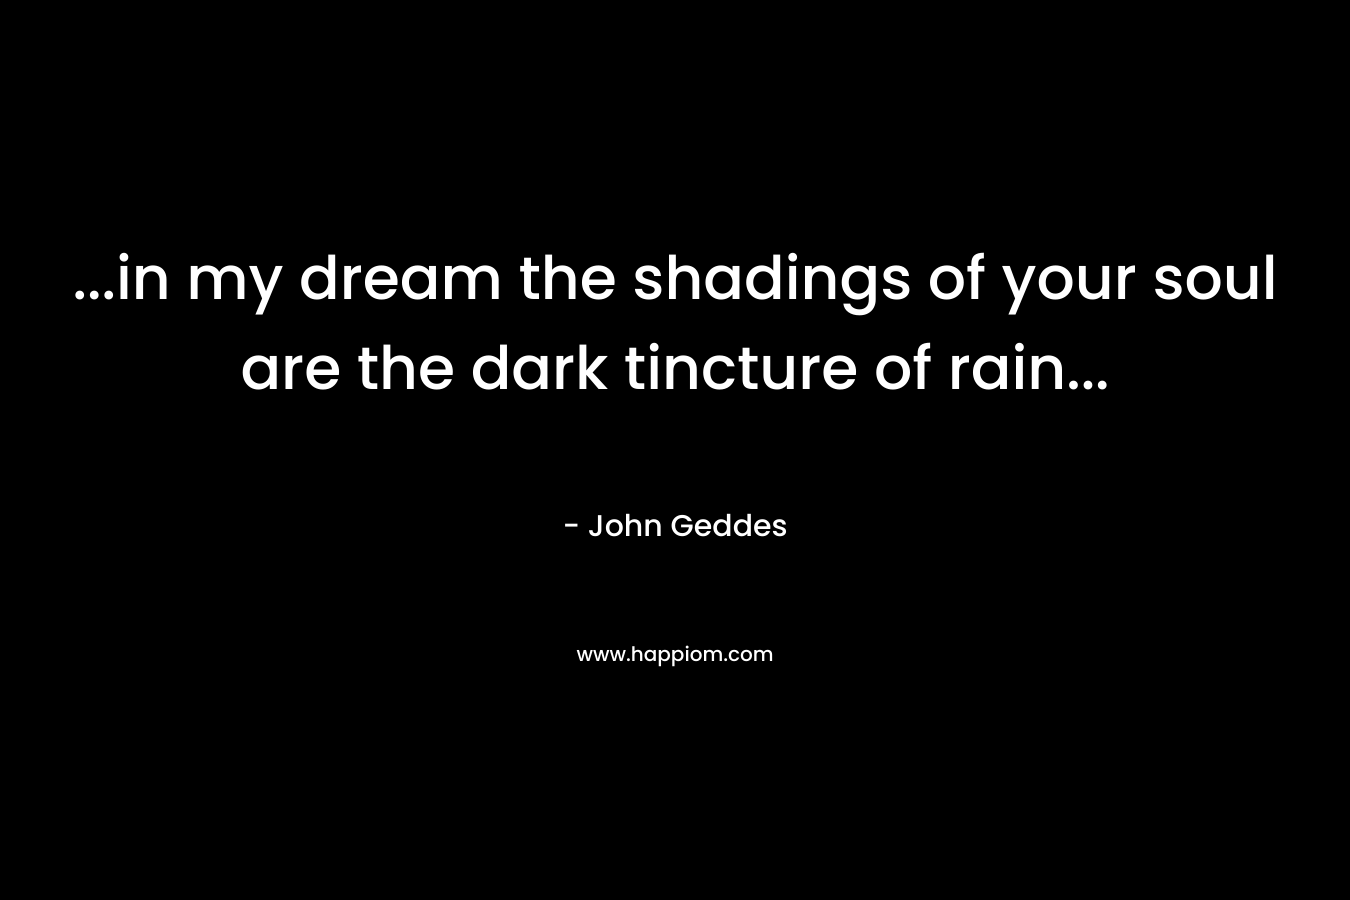 ...in my dream the shadings of your soul are the dark tincture of rain...